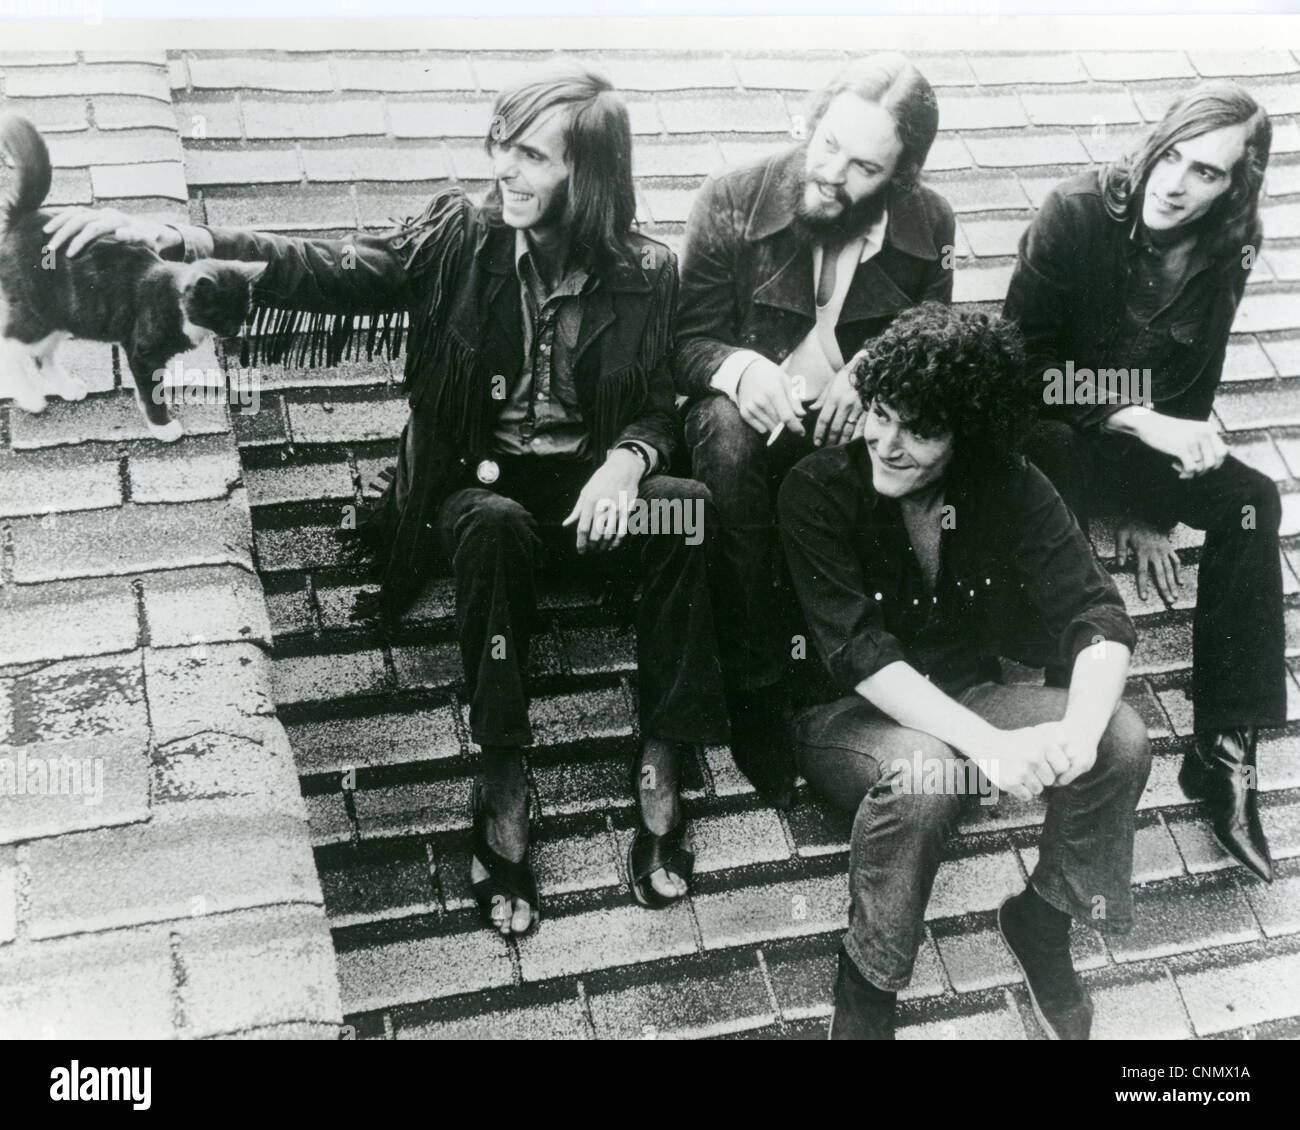 QUICKSILVER MESSENGER SERVICE Promotional photo of US rock group about 1969. See Description below for names Stock Photo